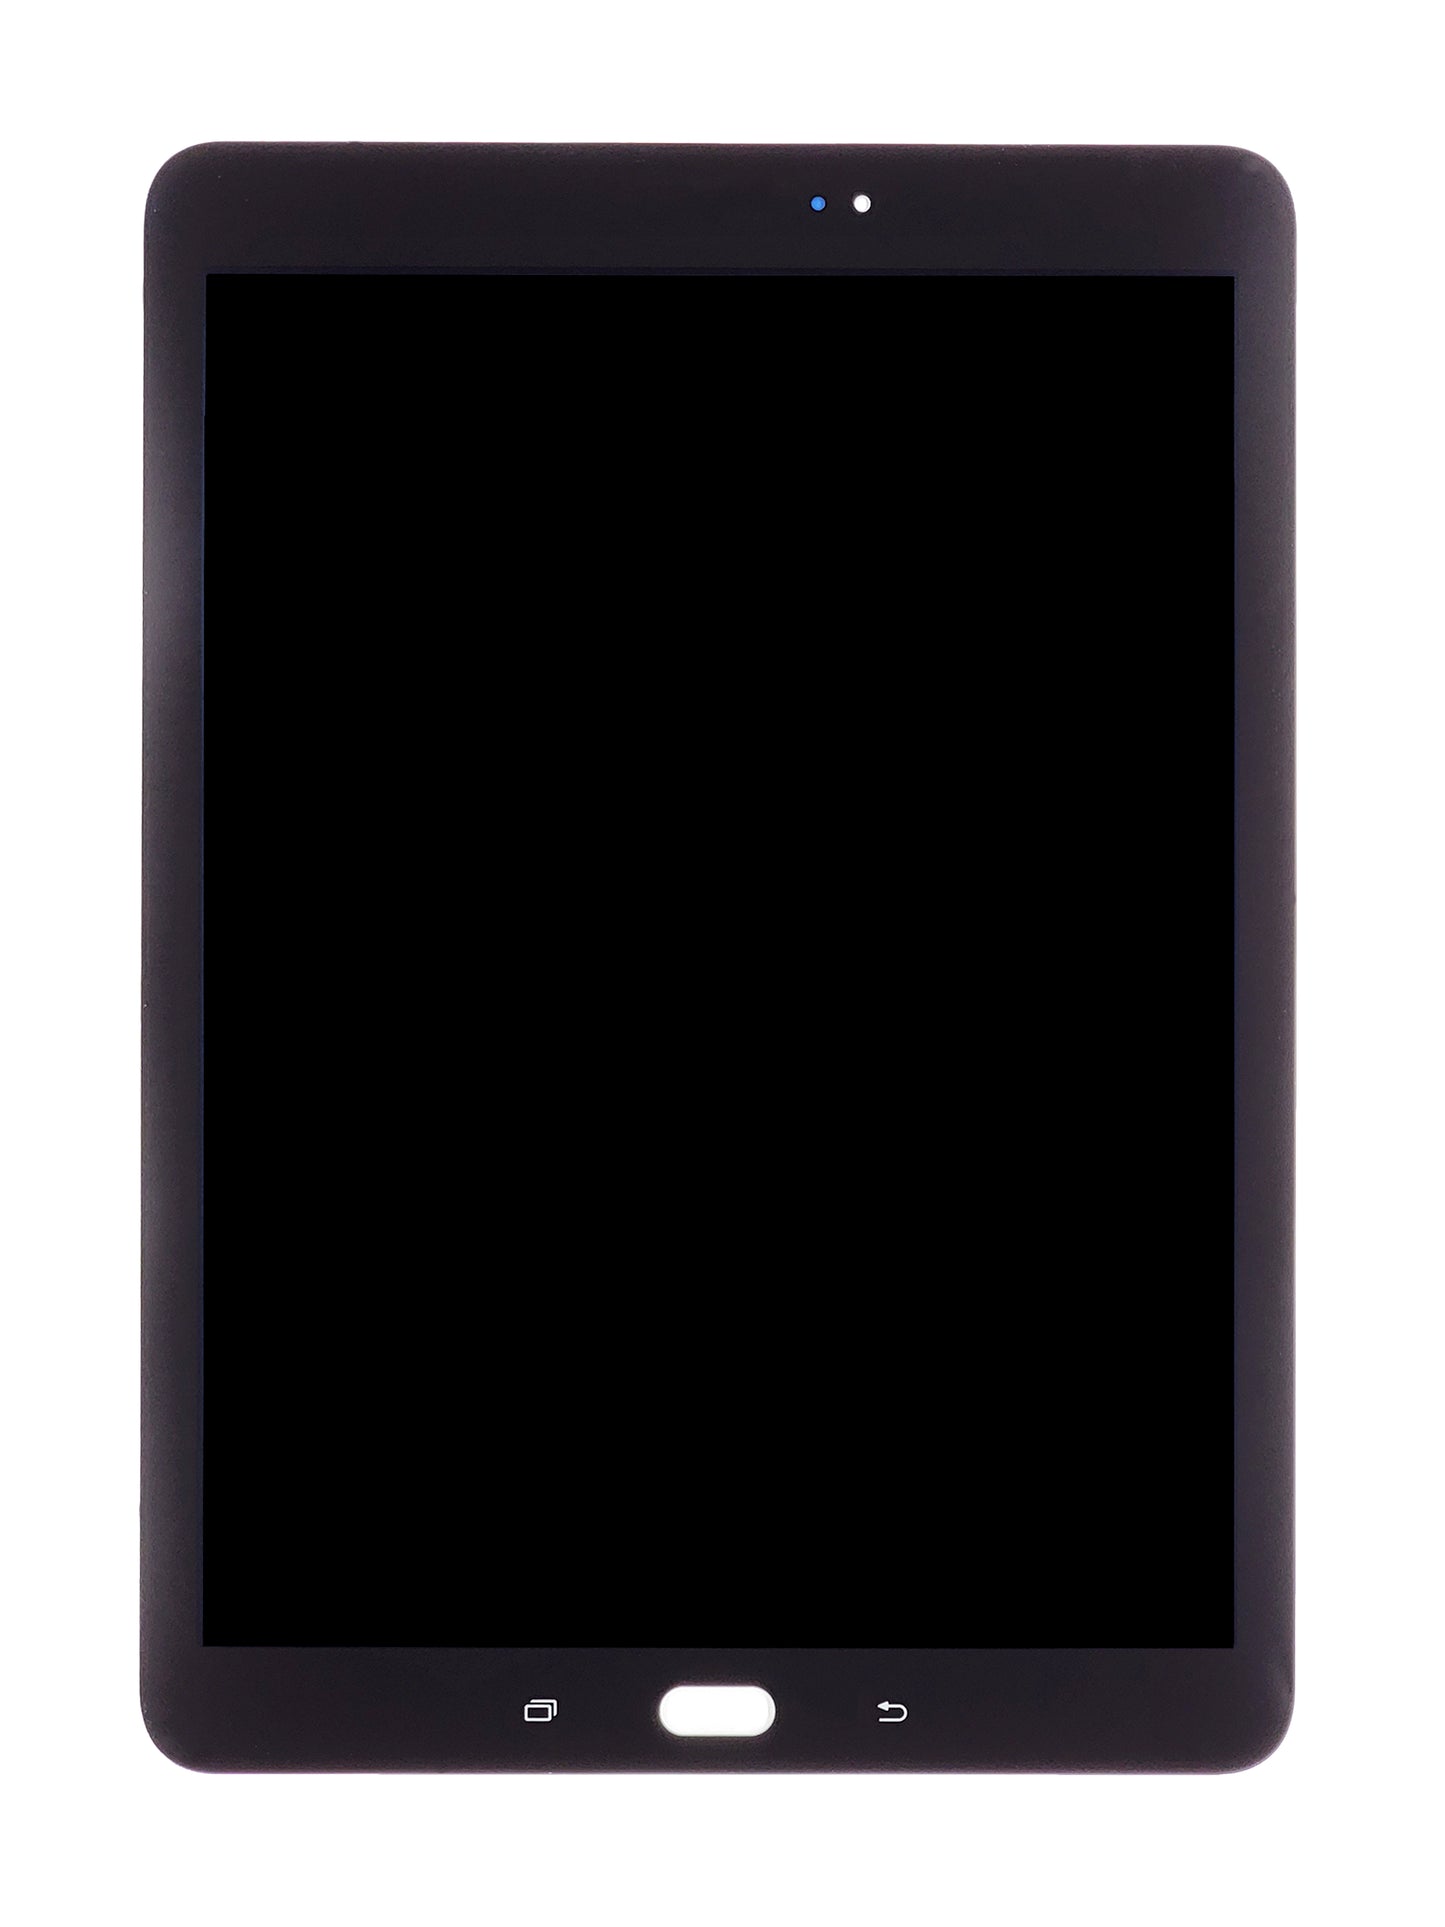 SGT Tab S2 9.7" (T810 / T813 / T815 / T817 / T819) LCD Assembly with Digitizer (Black)